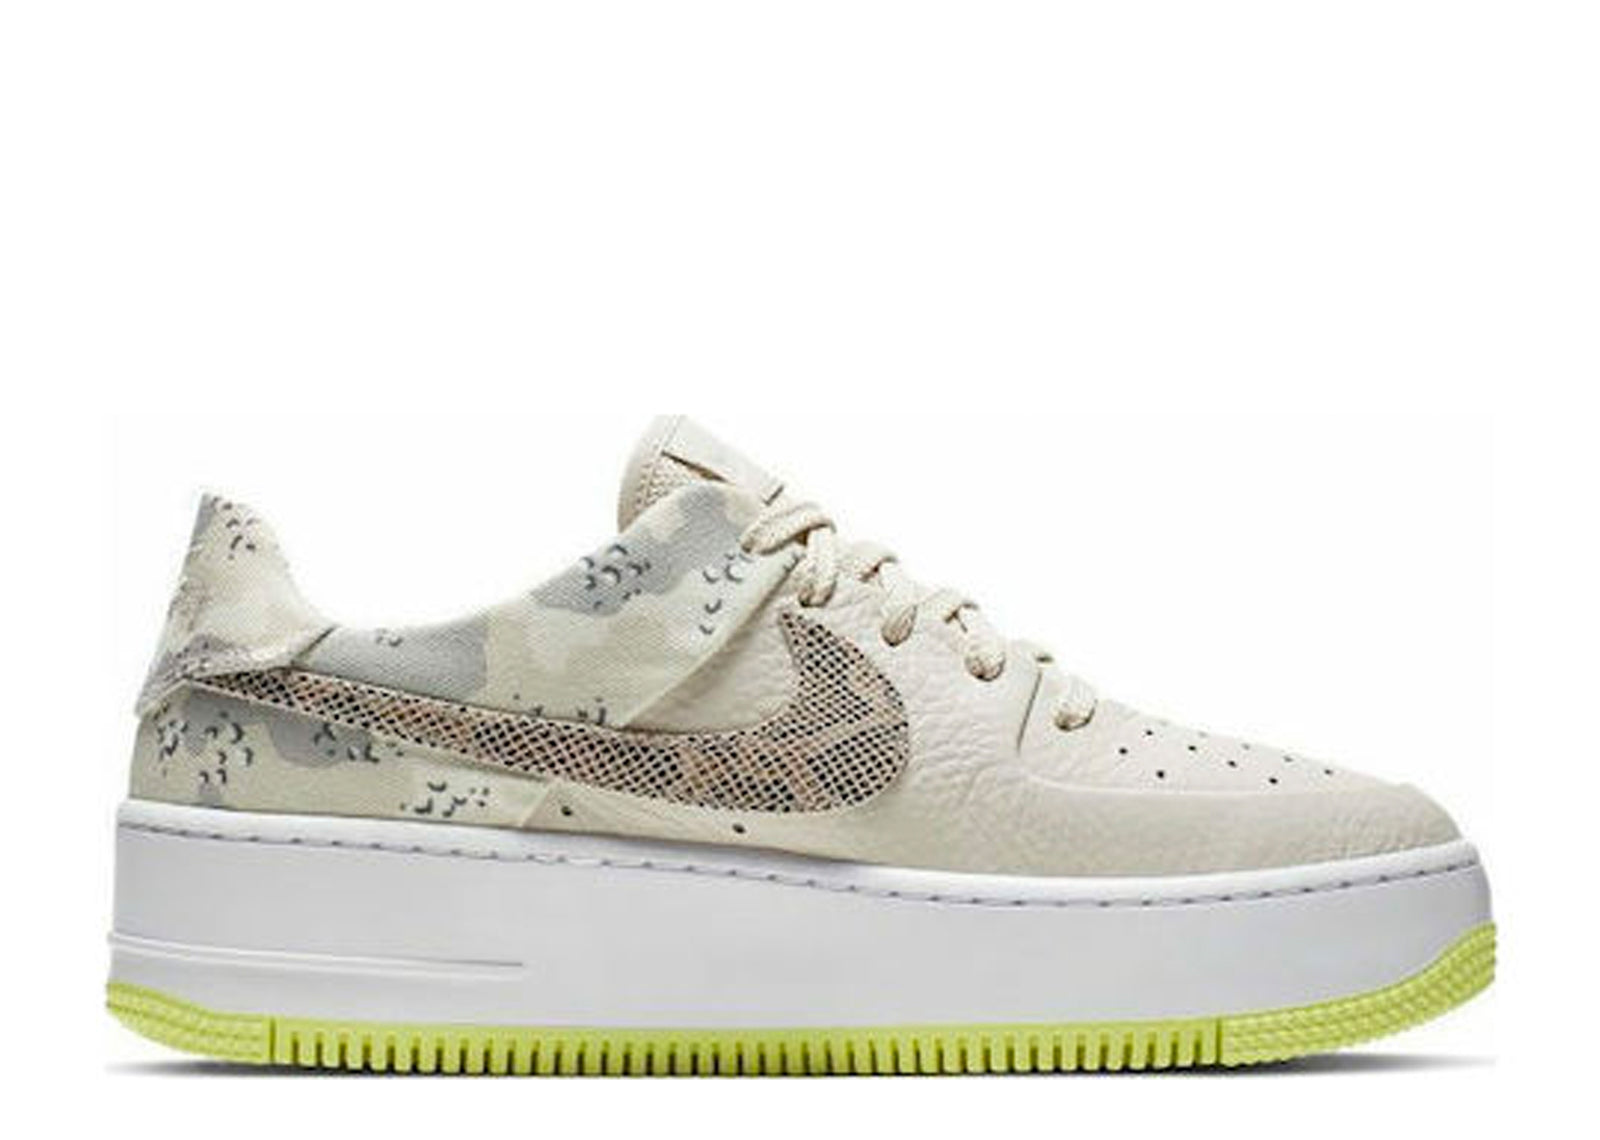 Second Chance - sail nike Air Force 1 Sage Low Orewood Camo - 42 | NEW